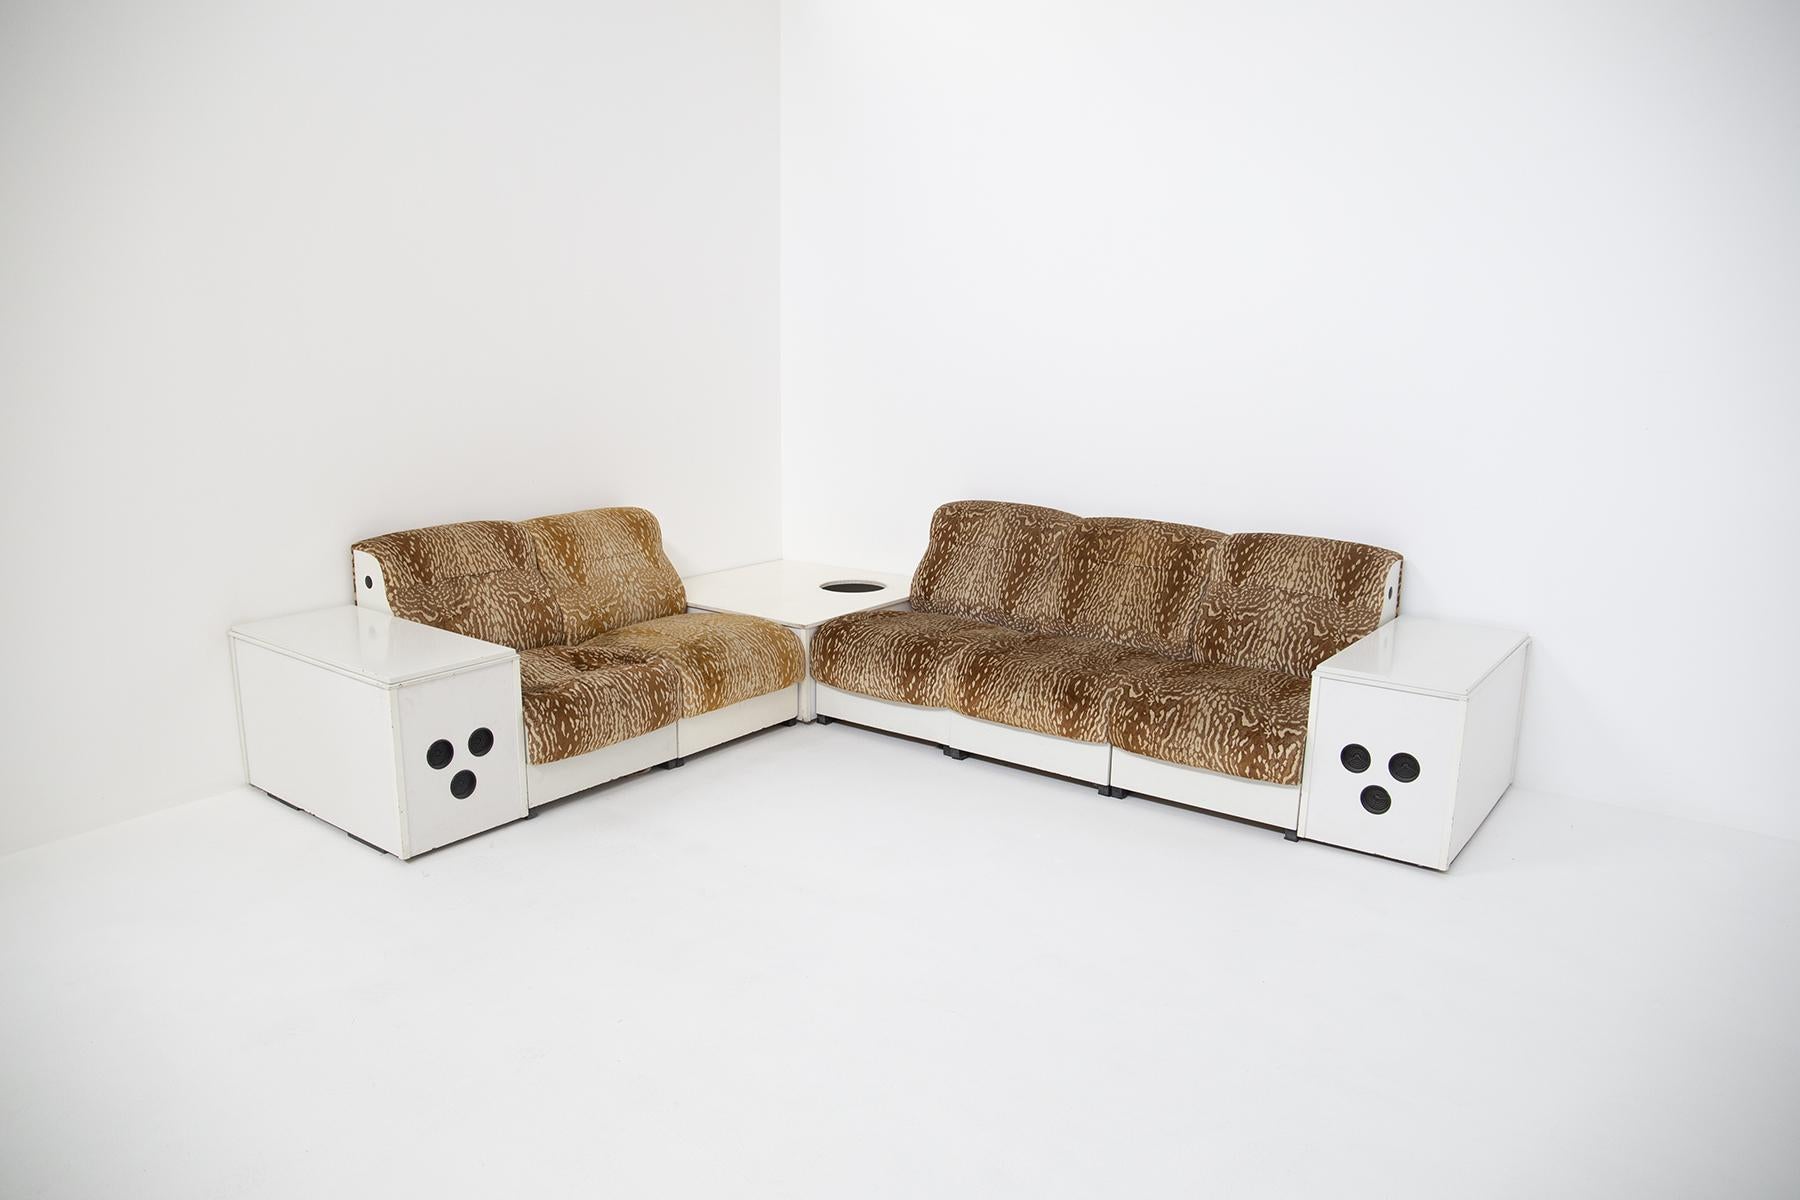 Italian Space Age sofa from the 1970s. The sofa is in its original condition even the fabric is original of the time. The sofa is modular and is ideal as a corner sofa. The peculiarity of the sofa is that at its sides are two cabinets ideal as a